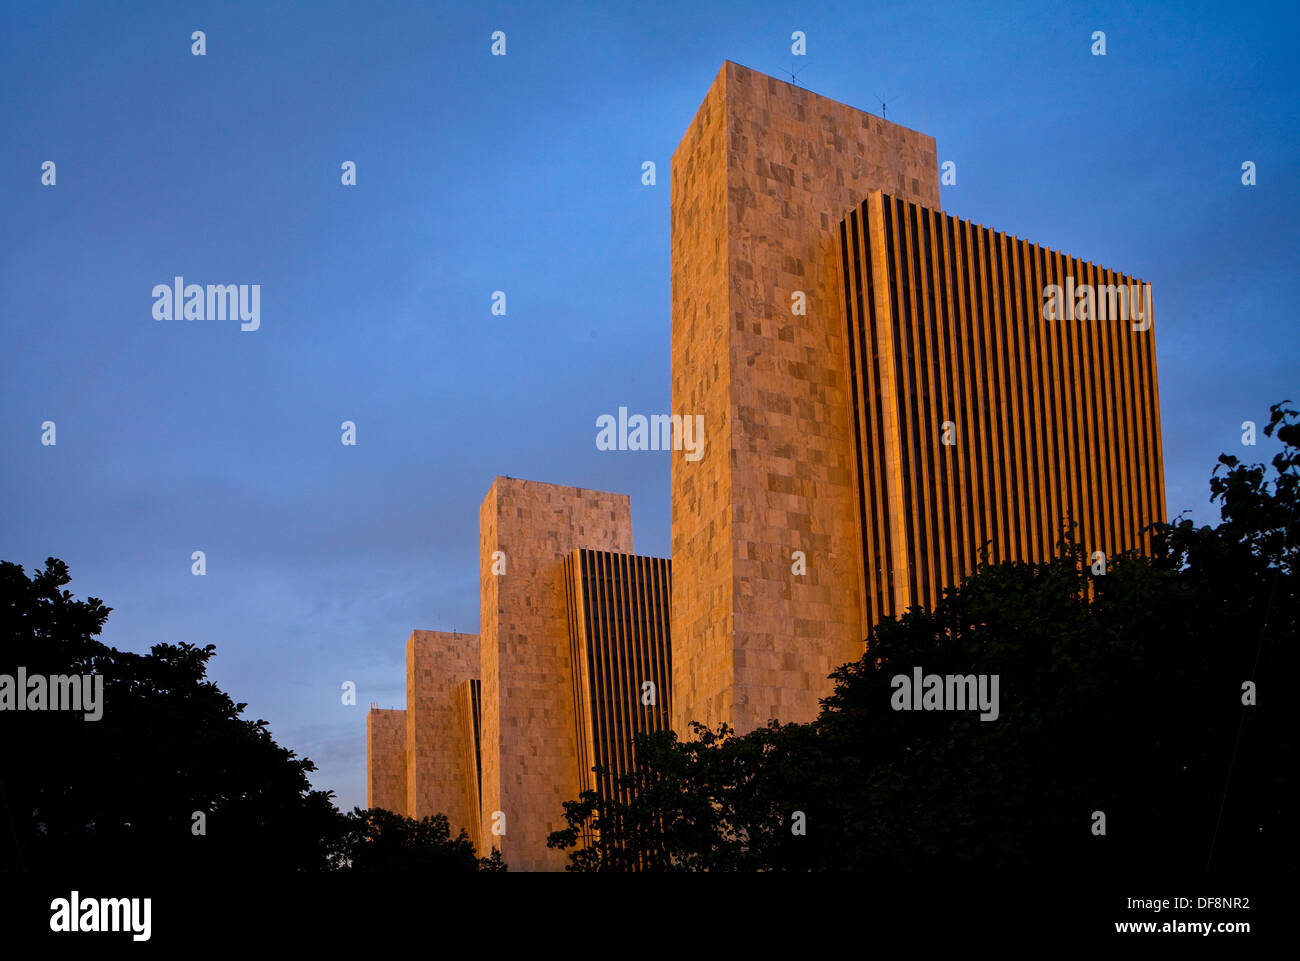 The Agency buildings are pictured in Albany, NY Stock Photo